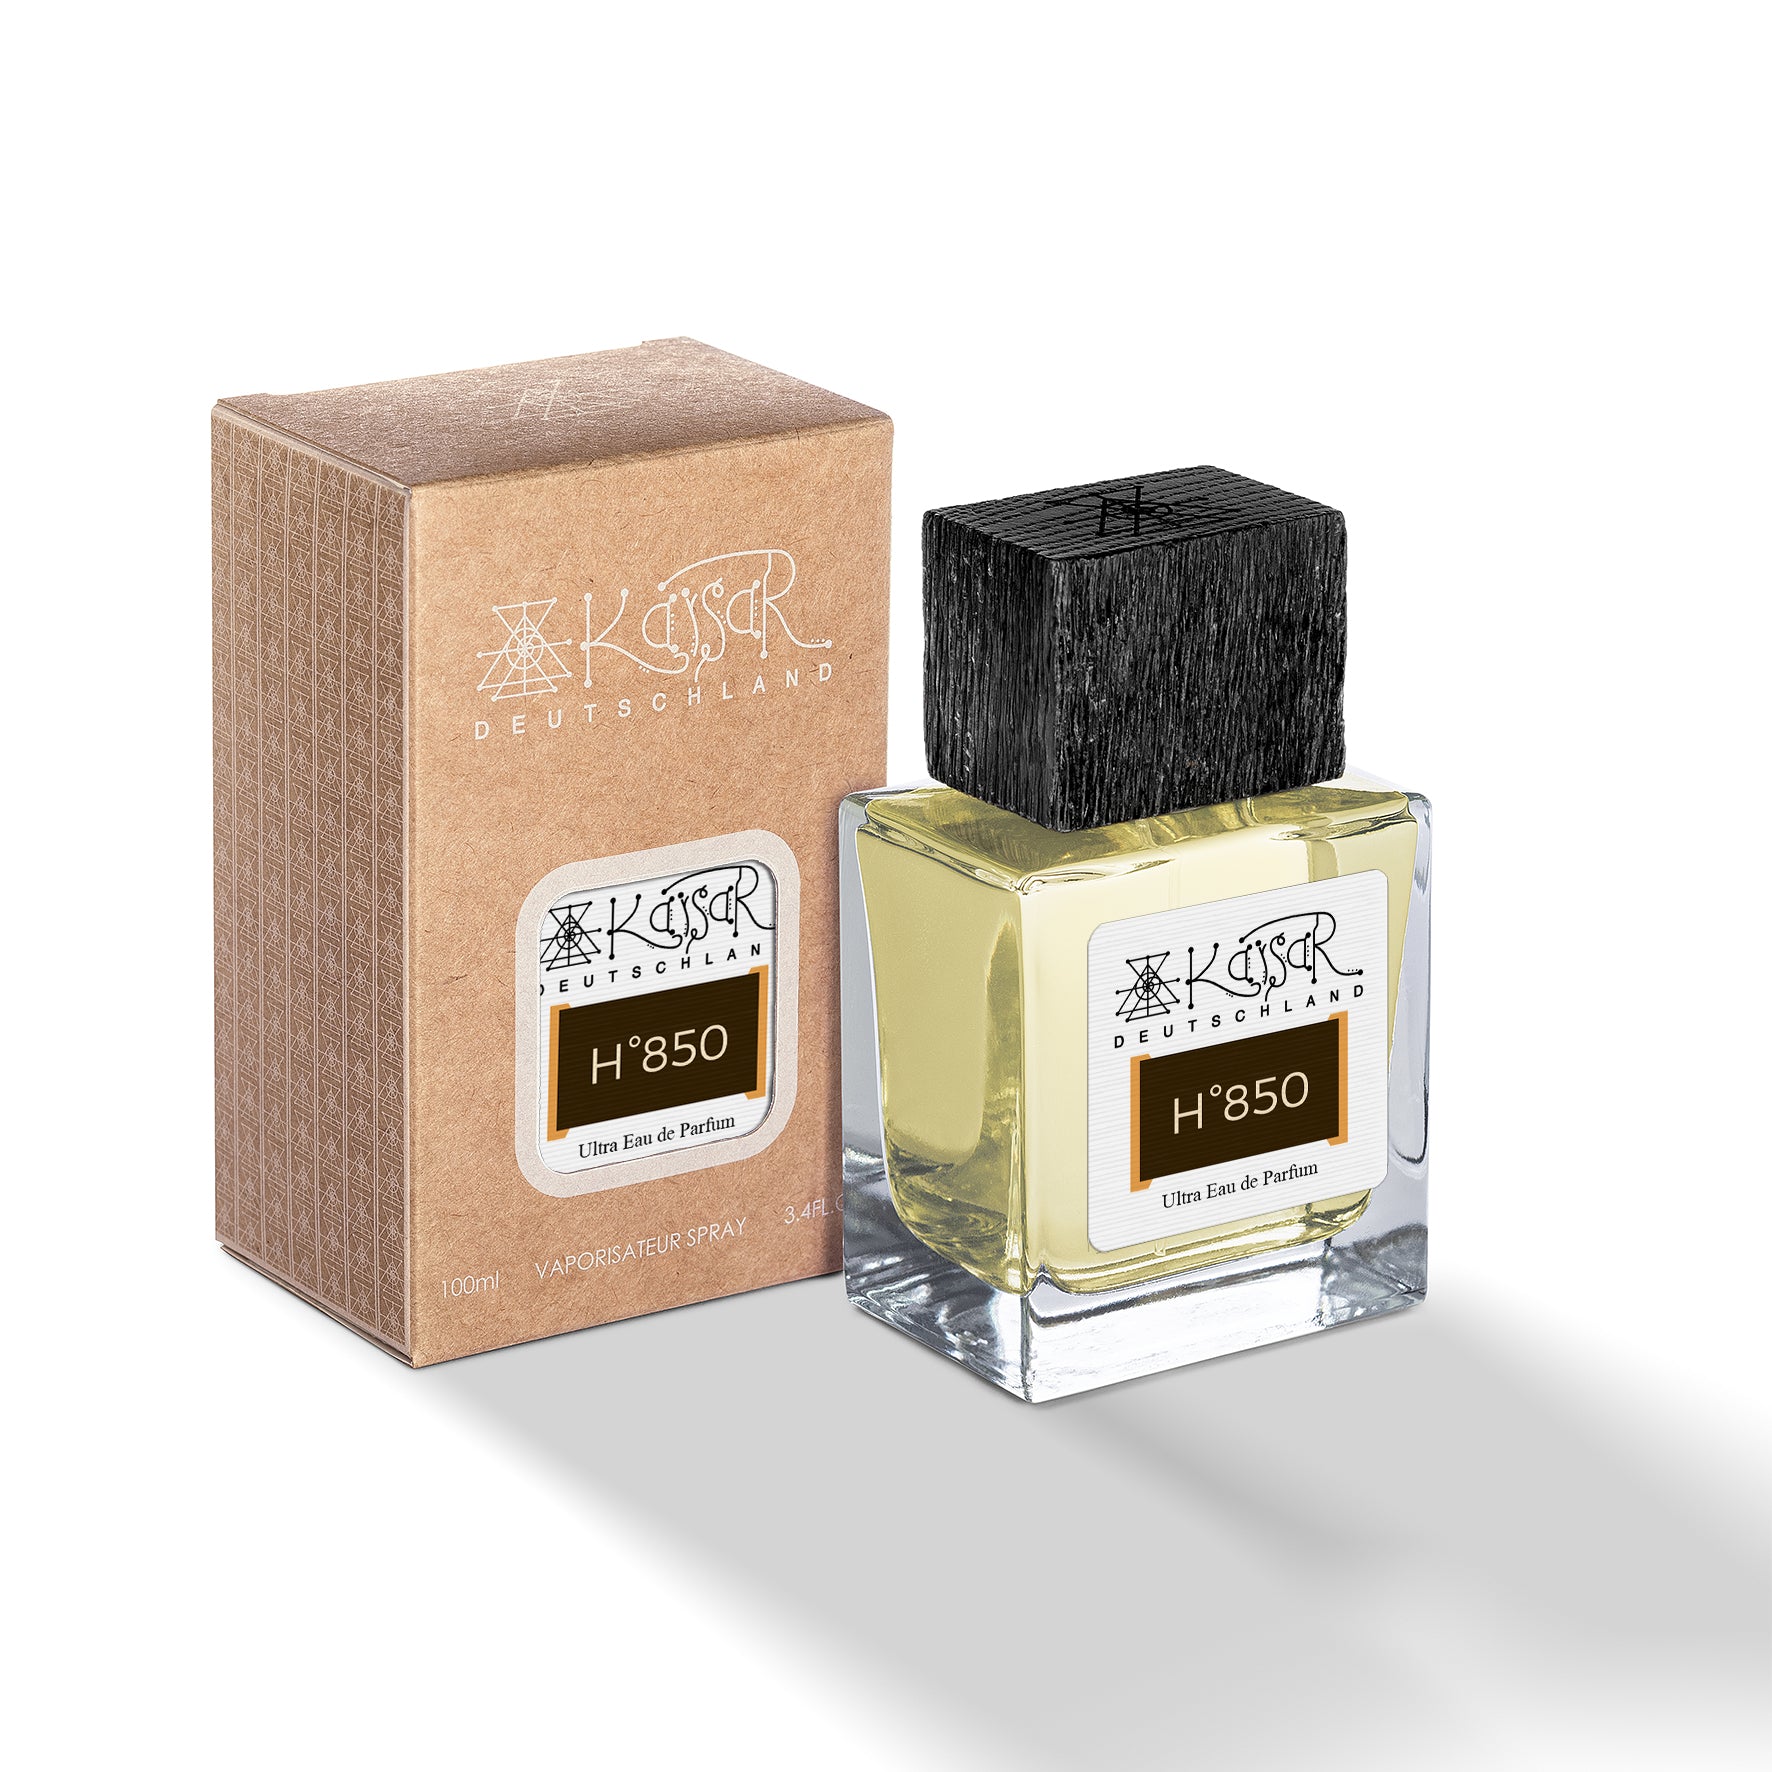 H°850 The One Man Scent